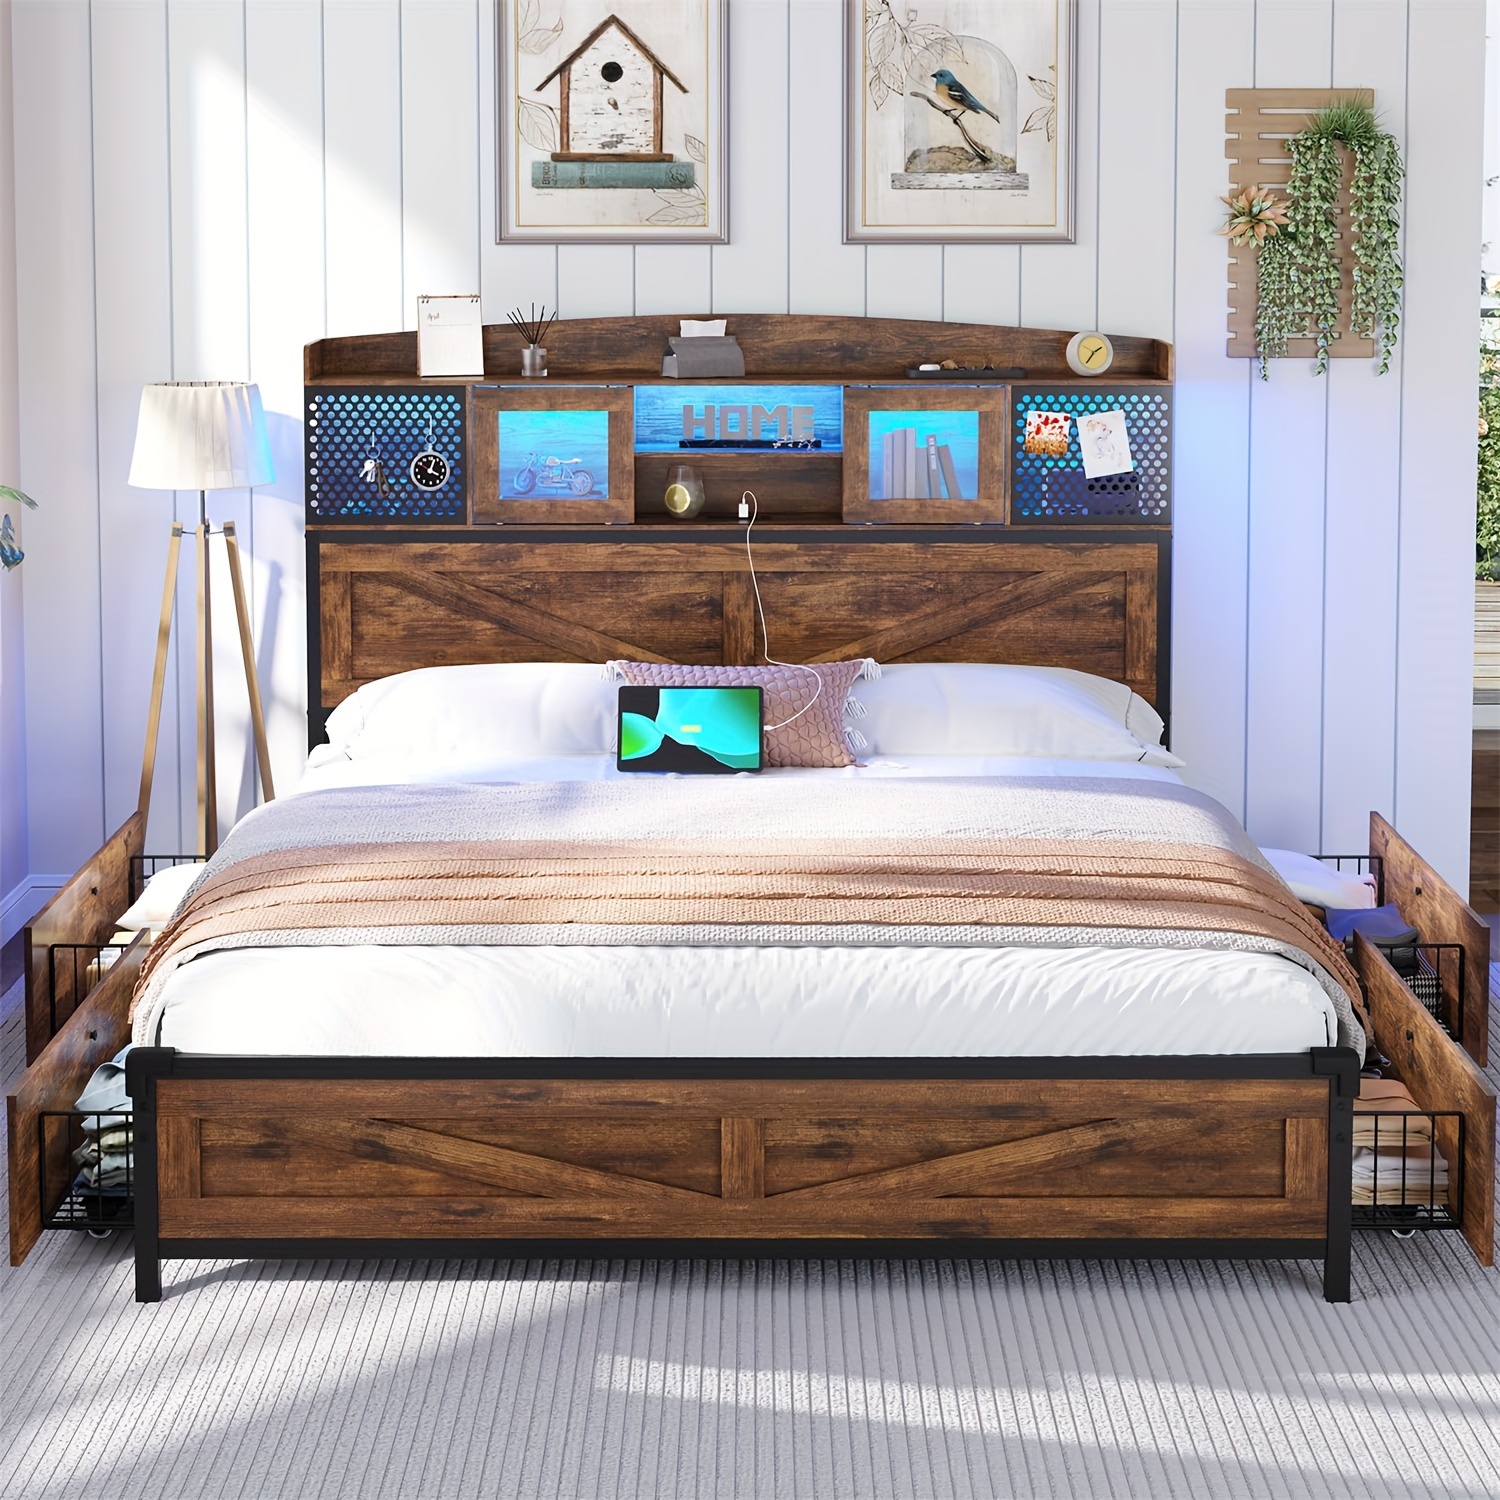 

Full Platform Bed Frame With Led Lights And Power Outlets, Farmhouse Bed With 4 Drawers And Headboard Storage Shelves, Rustic Brown